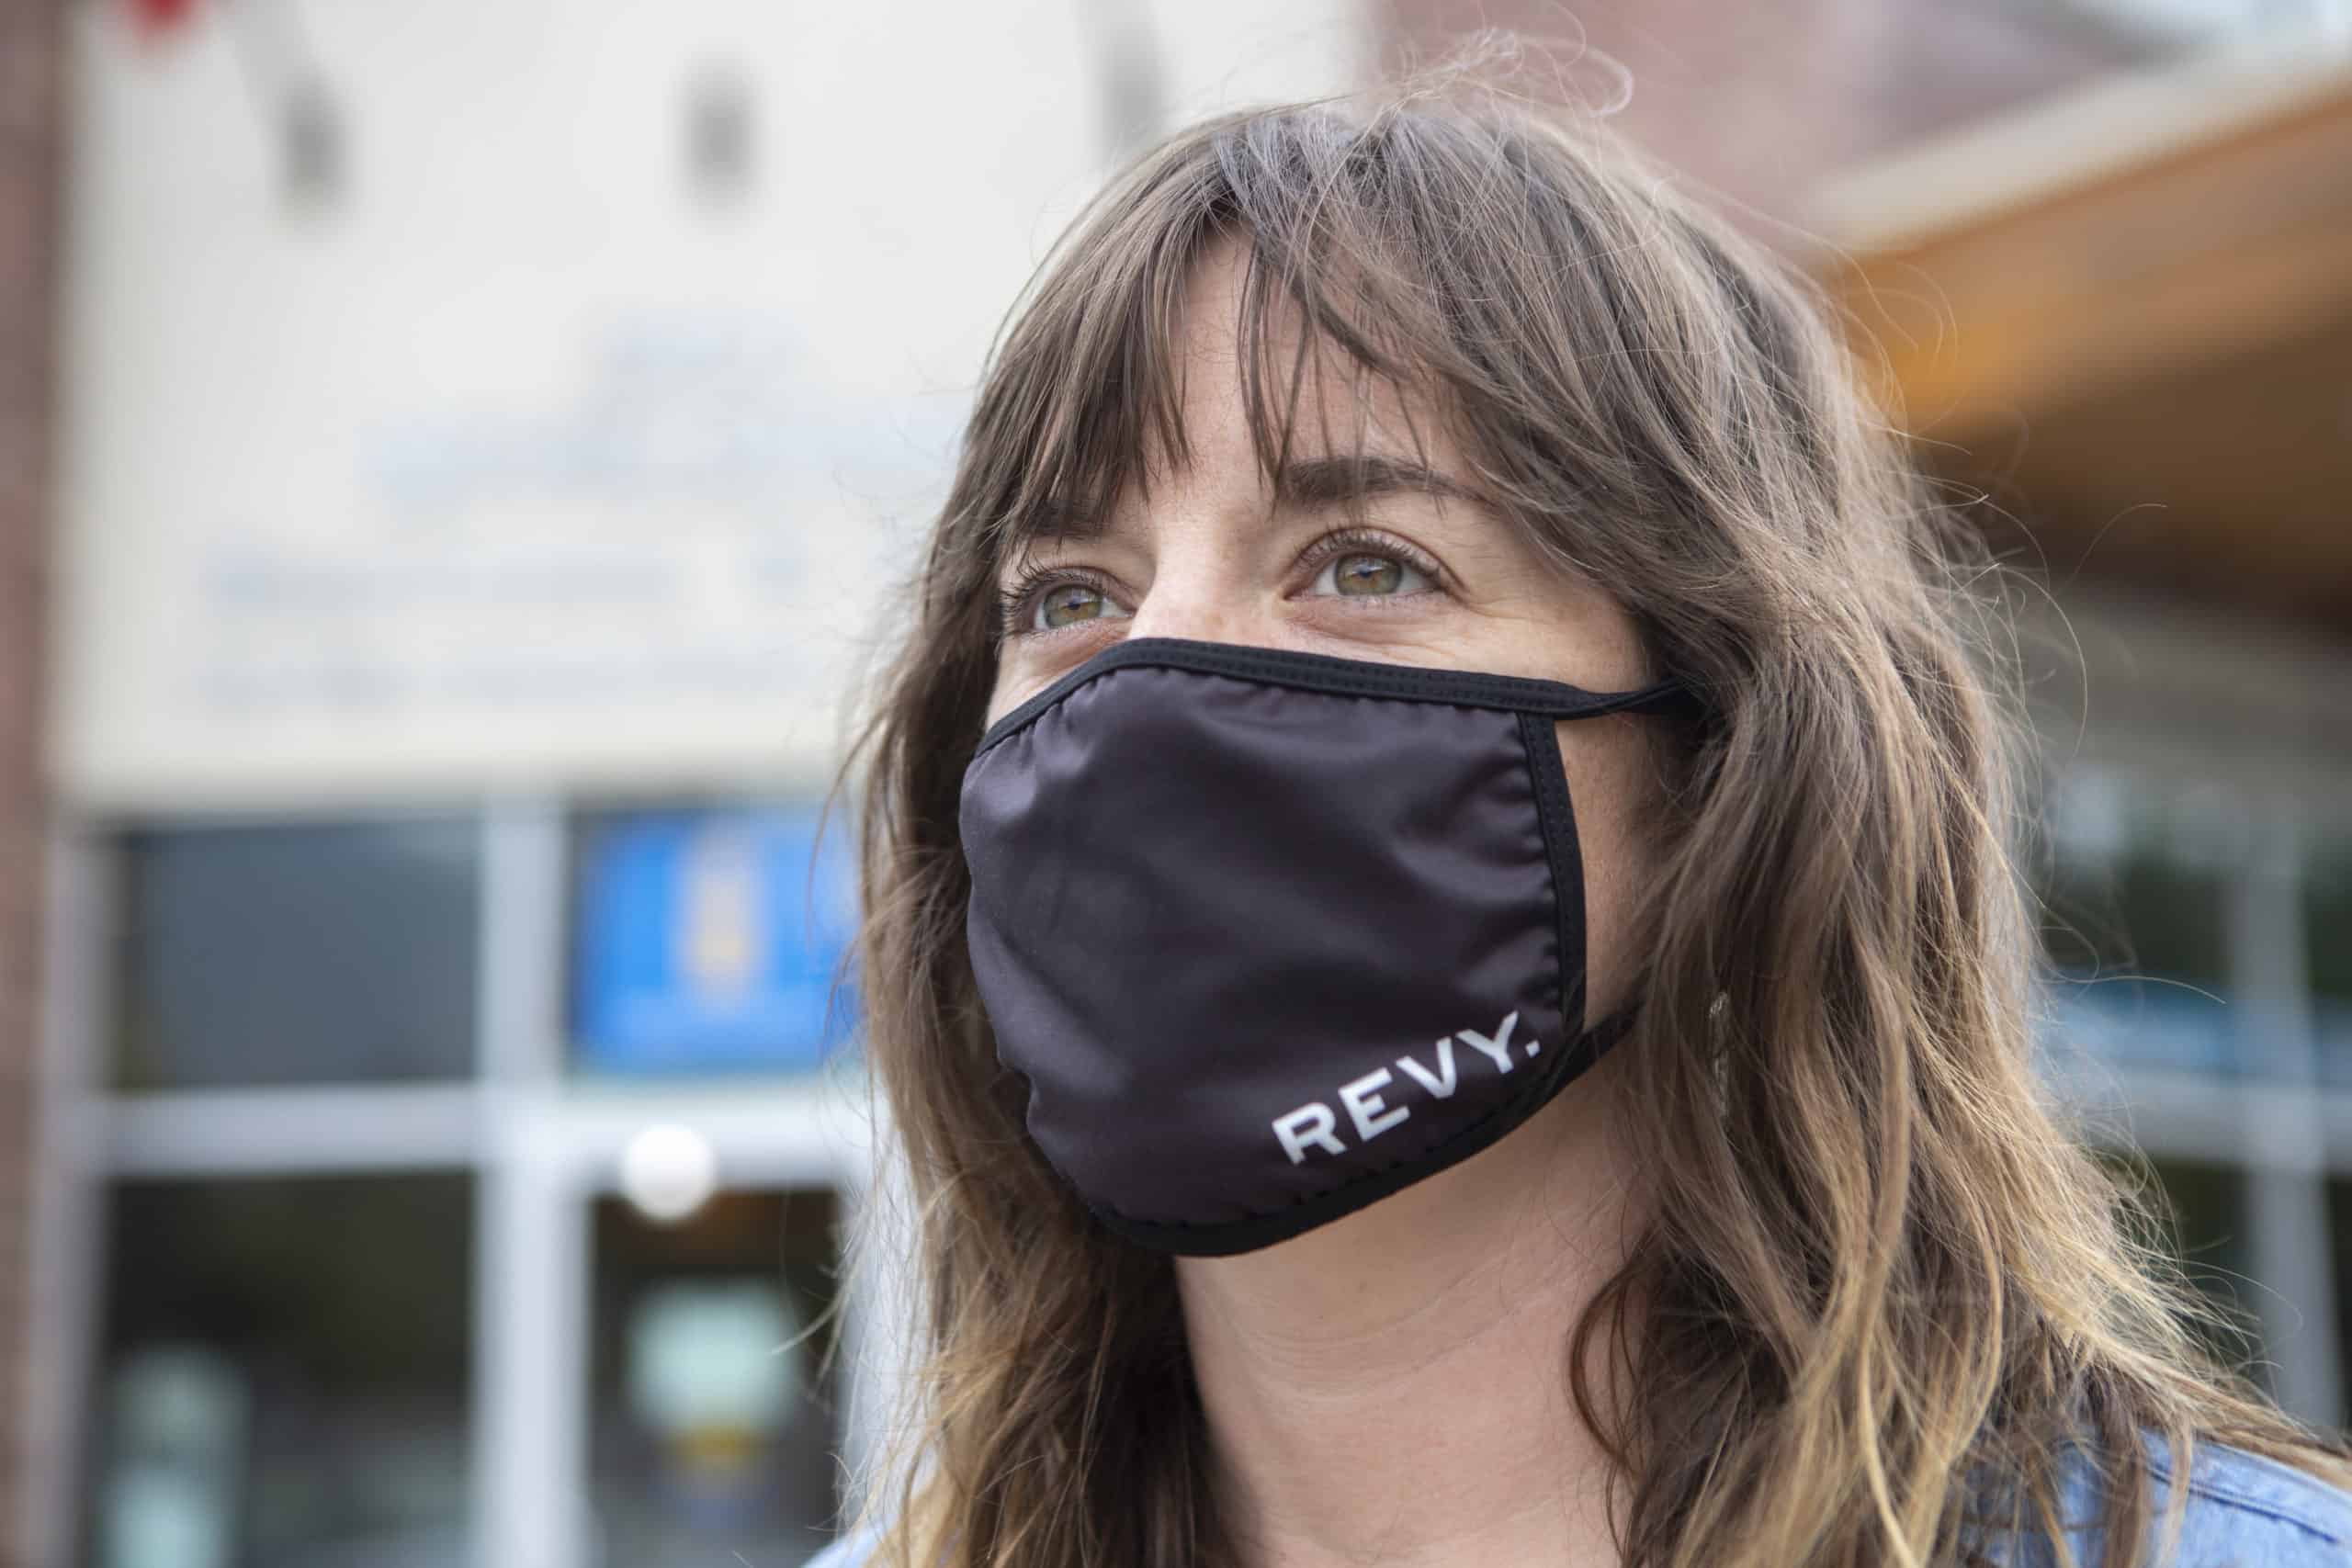 Revy. branded masks are available at the Visitor Information Centre.